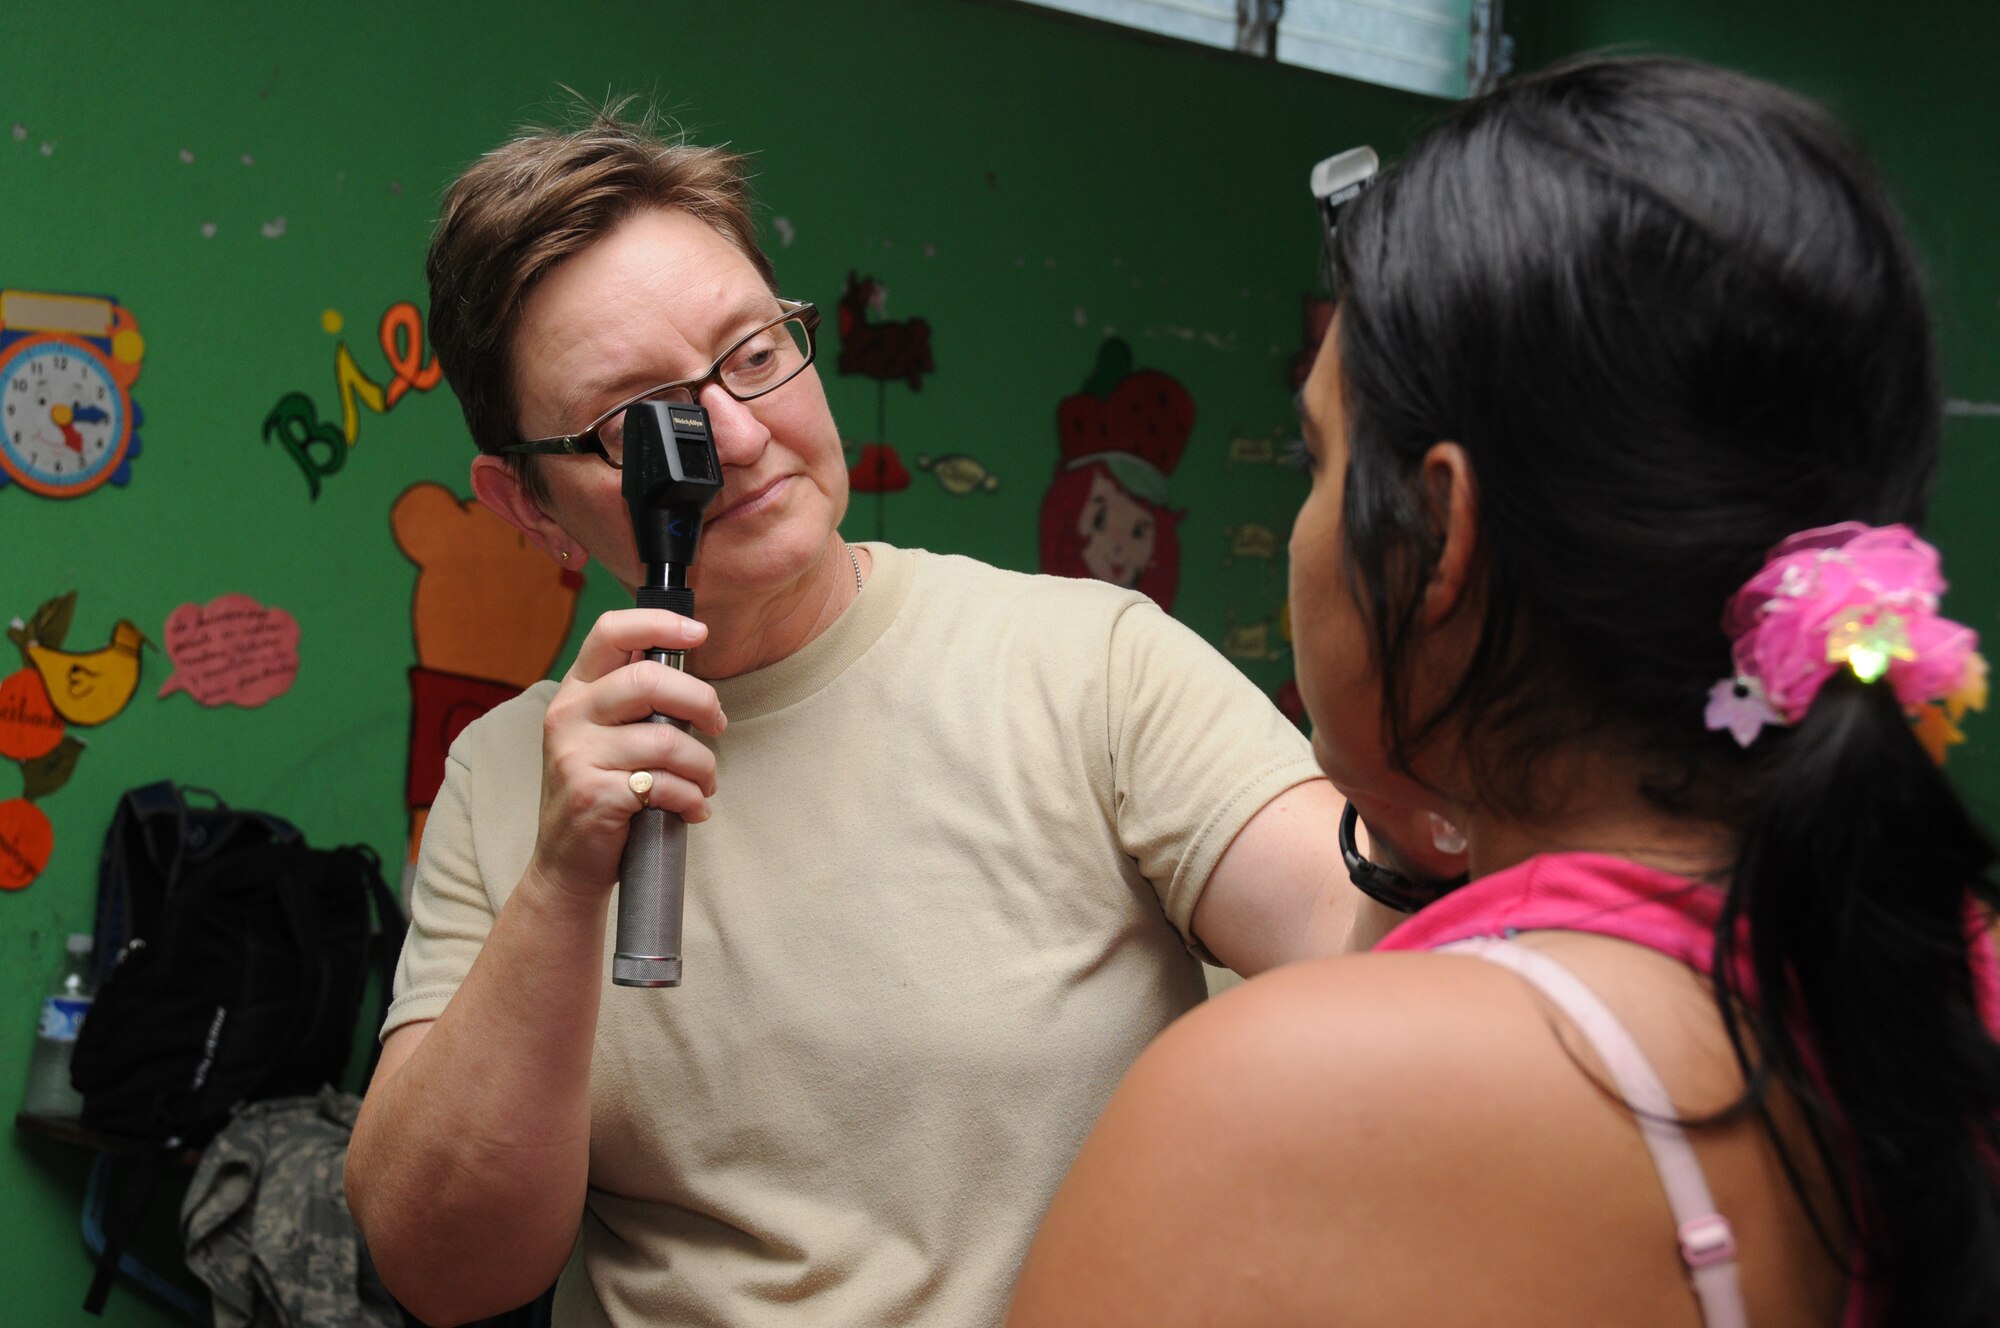 Maj. Barbara Wujciak, and optometrist with the 916th Aerospace Medicine Squadron at Seymour Johnson Air Force Base in North Carolina, evaluates the eyesight of a patient here Aug. 8, 2011. Wujciak was one of about 50 reservists from around the U.S. deployed to Nicaragua on a humanitarian mission. (USAF photo by Senior Airman Meredith A. H. Thomas, 916 ARW/PA)